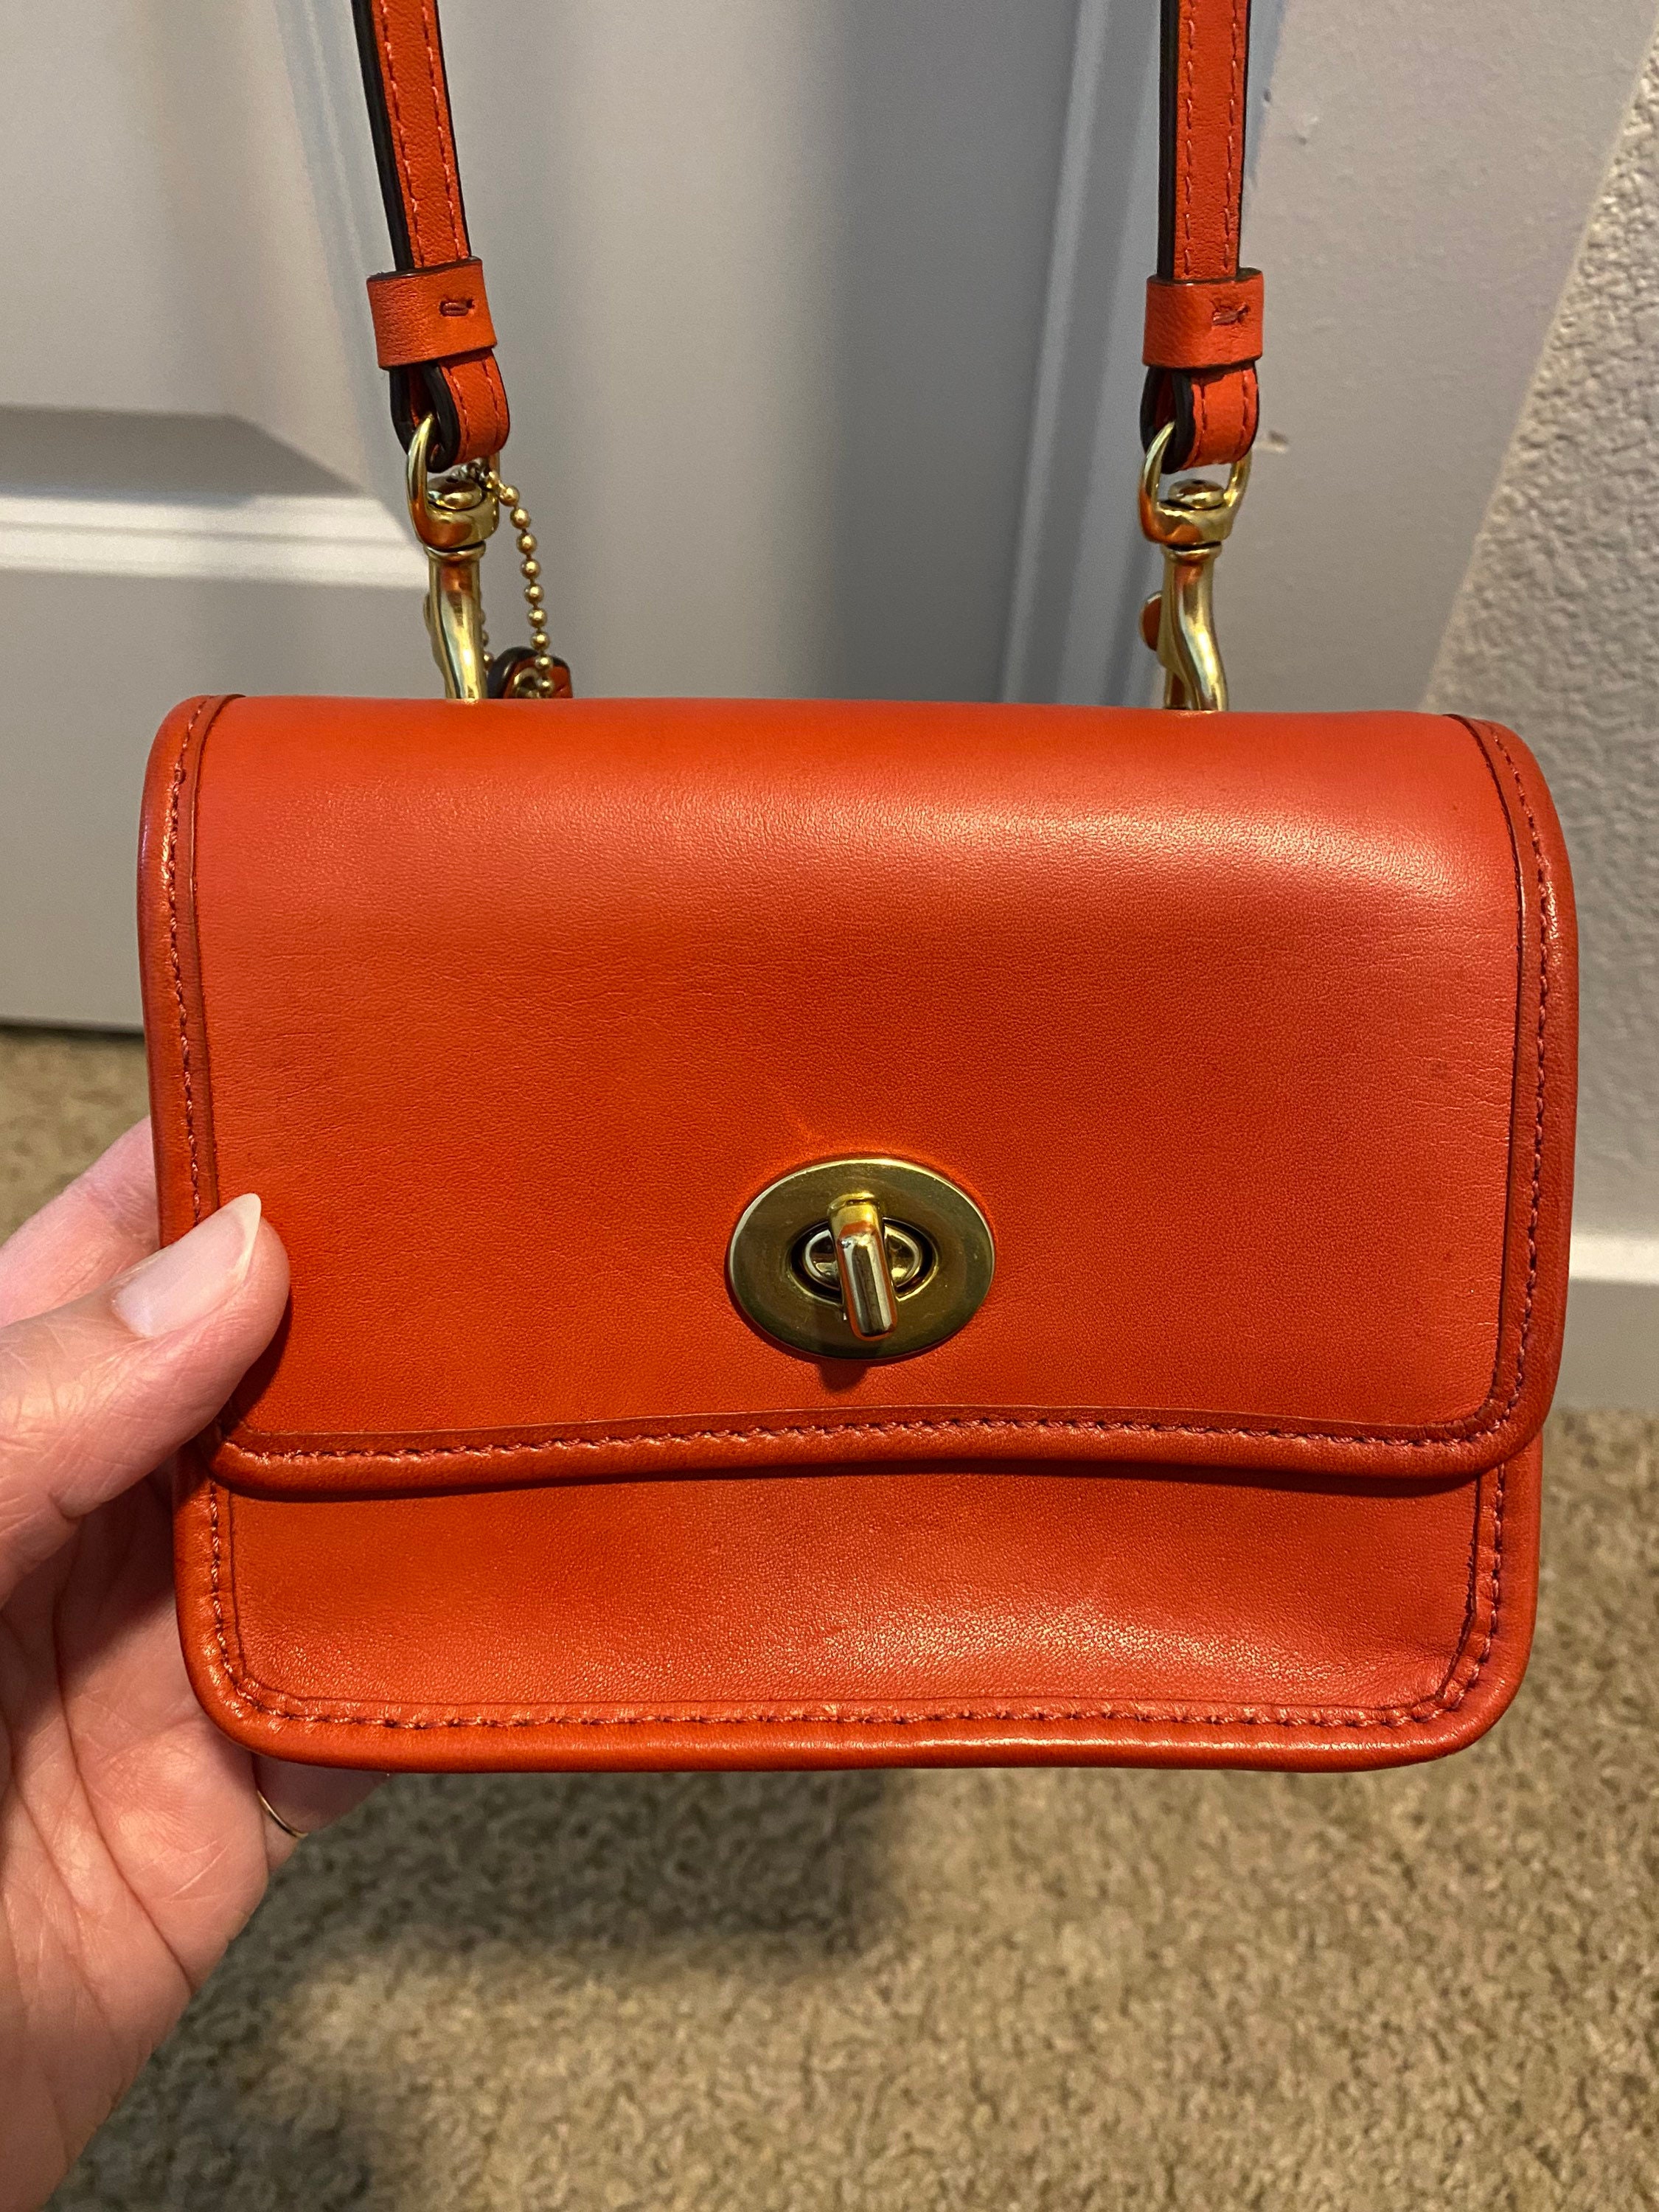 COACH Legacy Mini Satchel in Leather in Brown